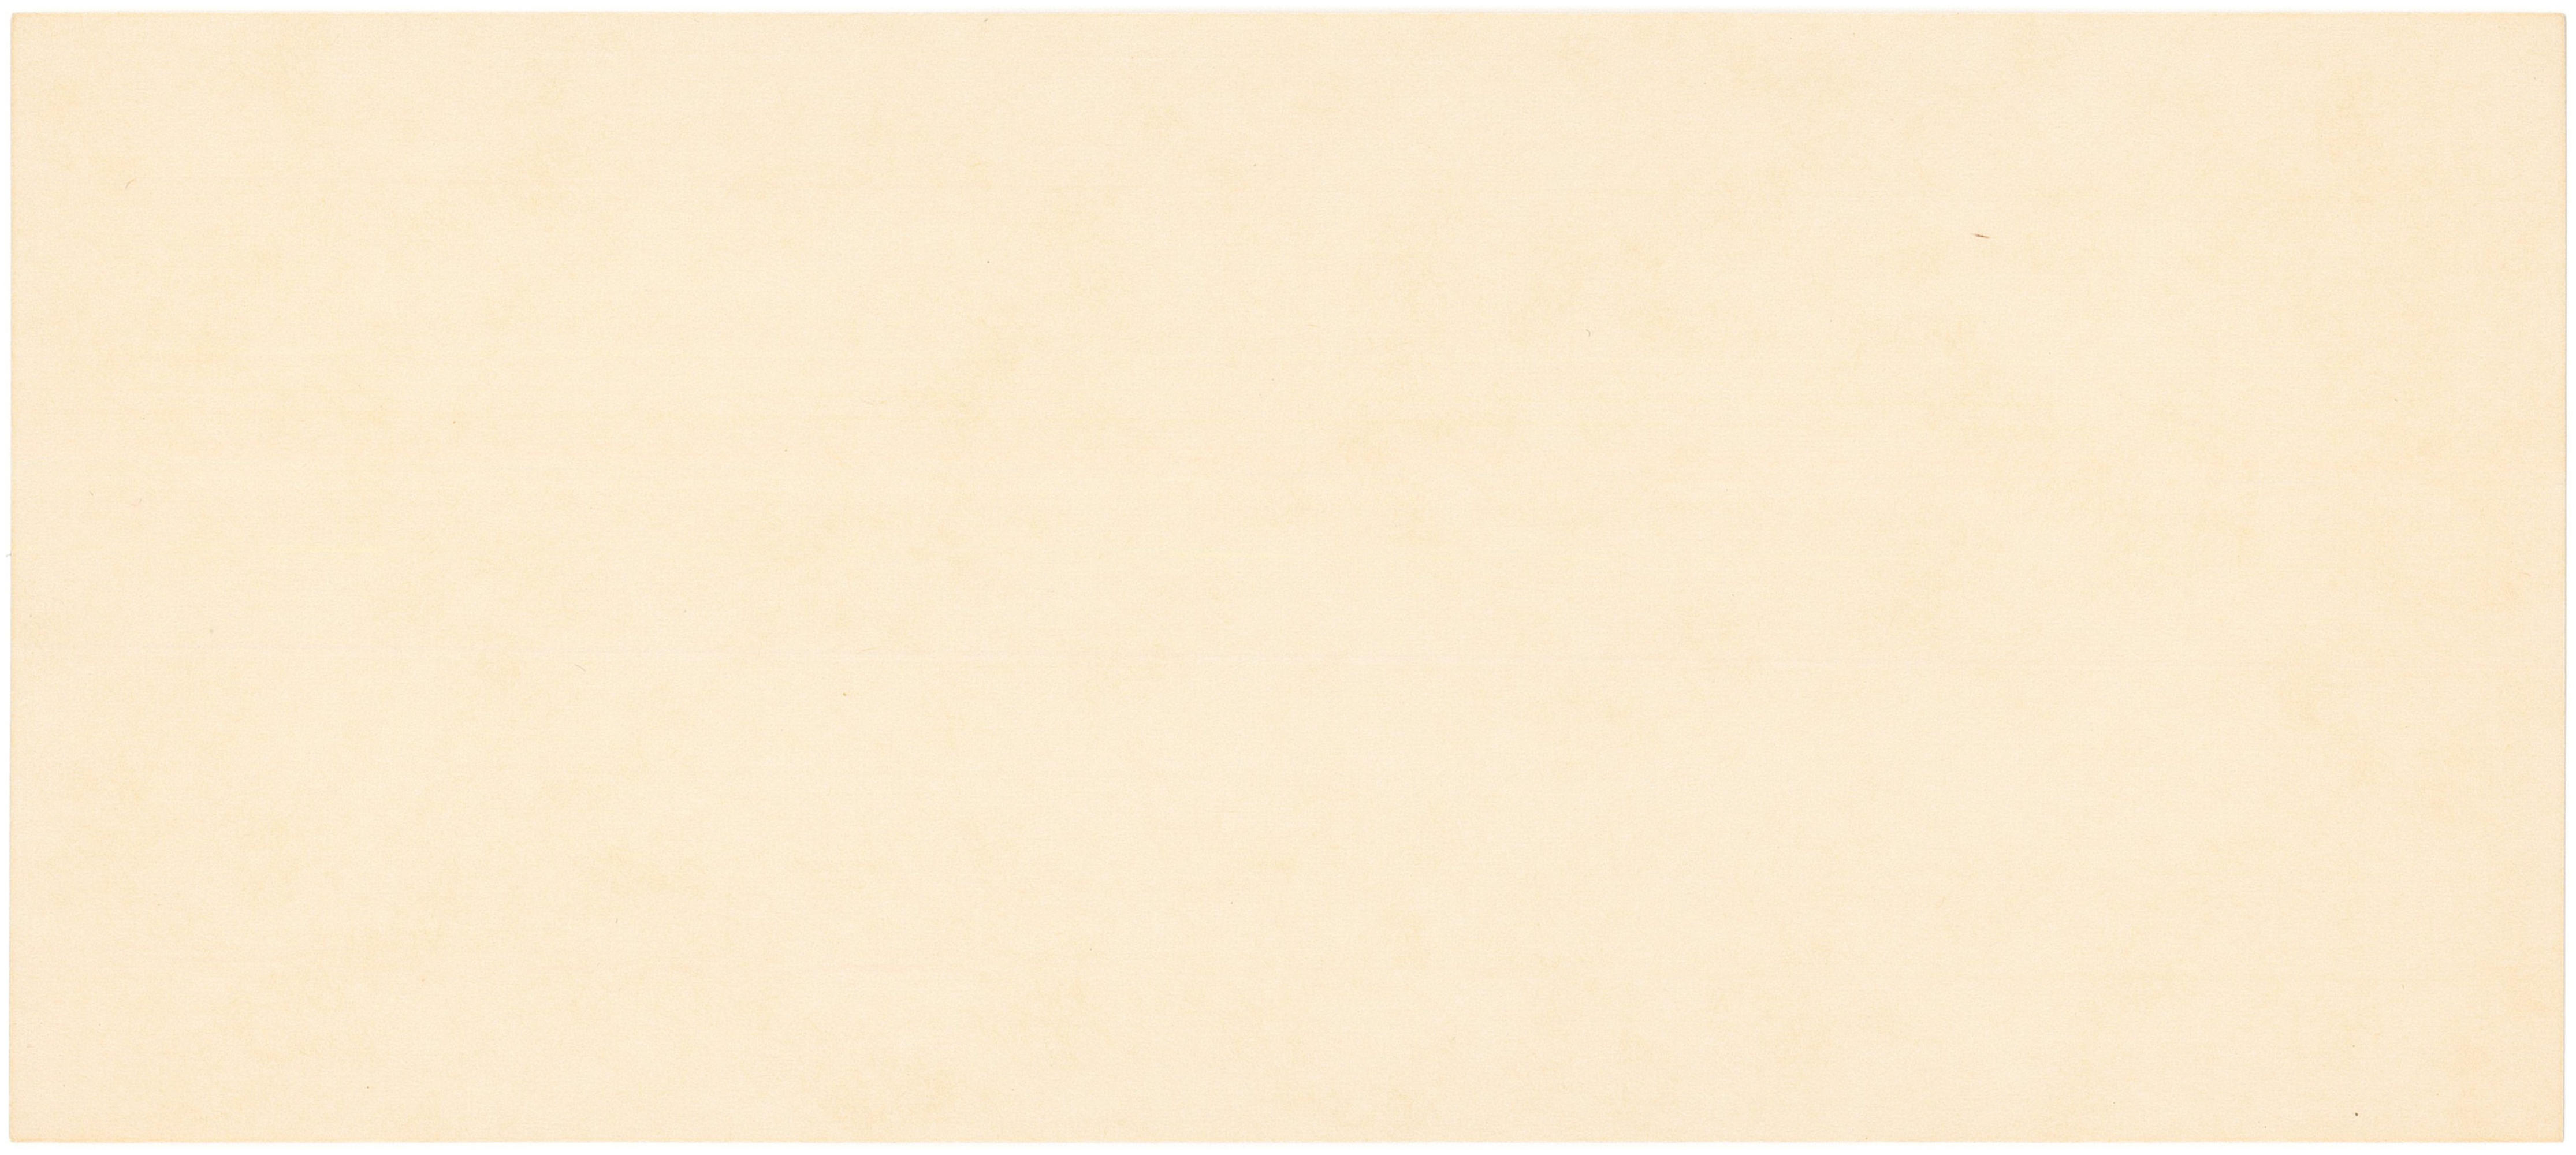 Blank Square Card